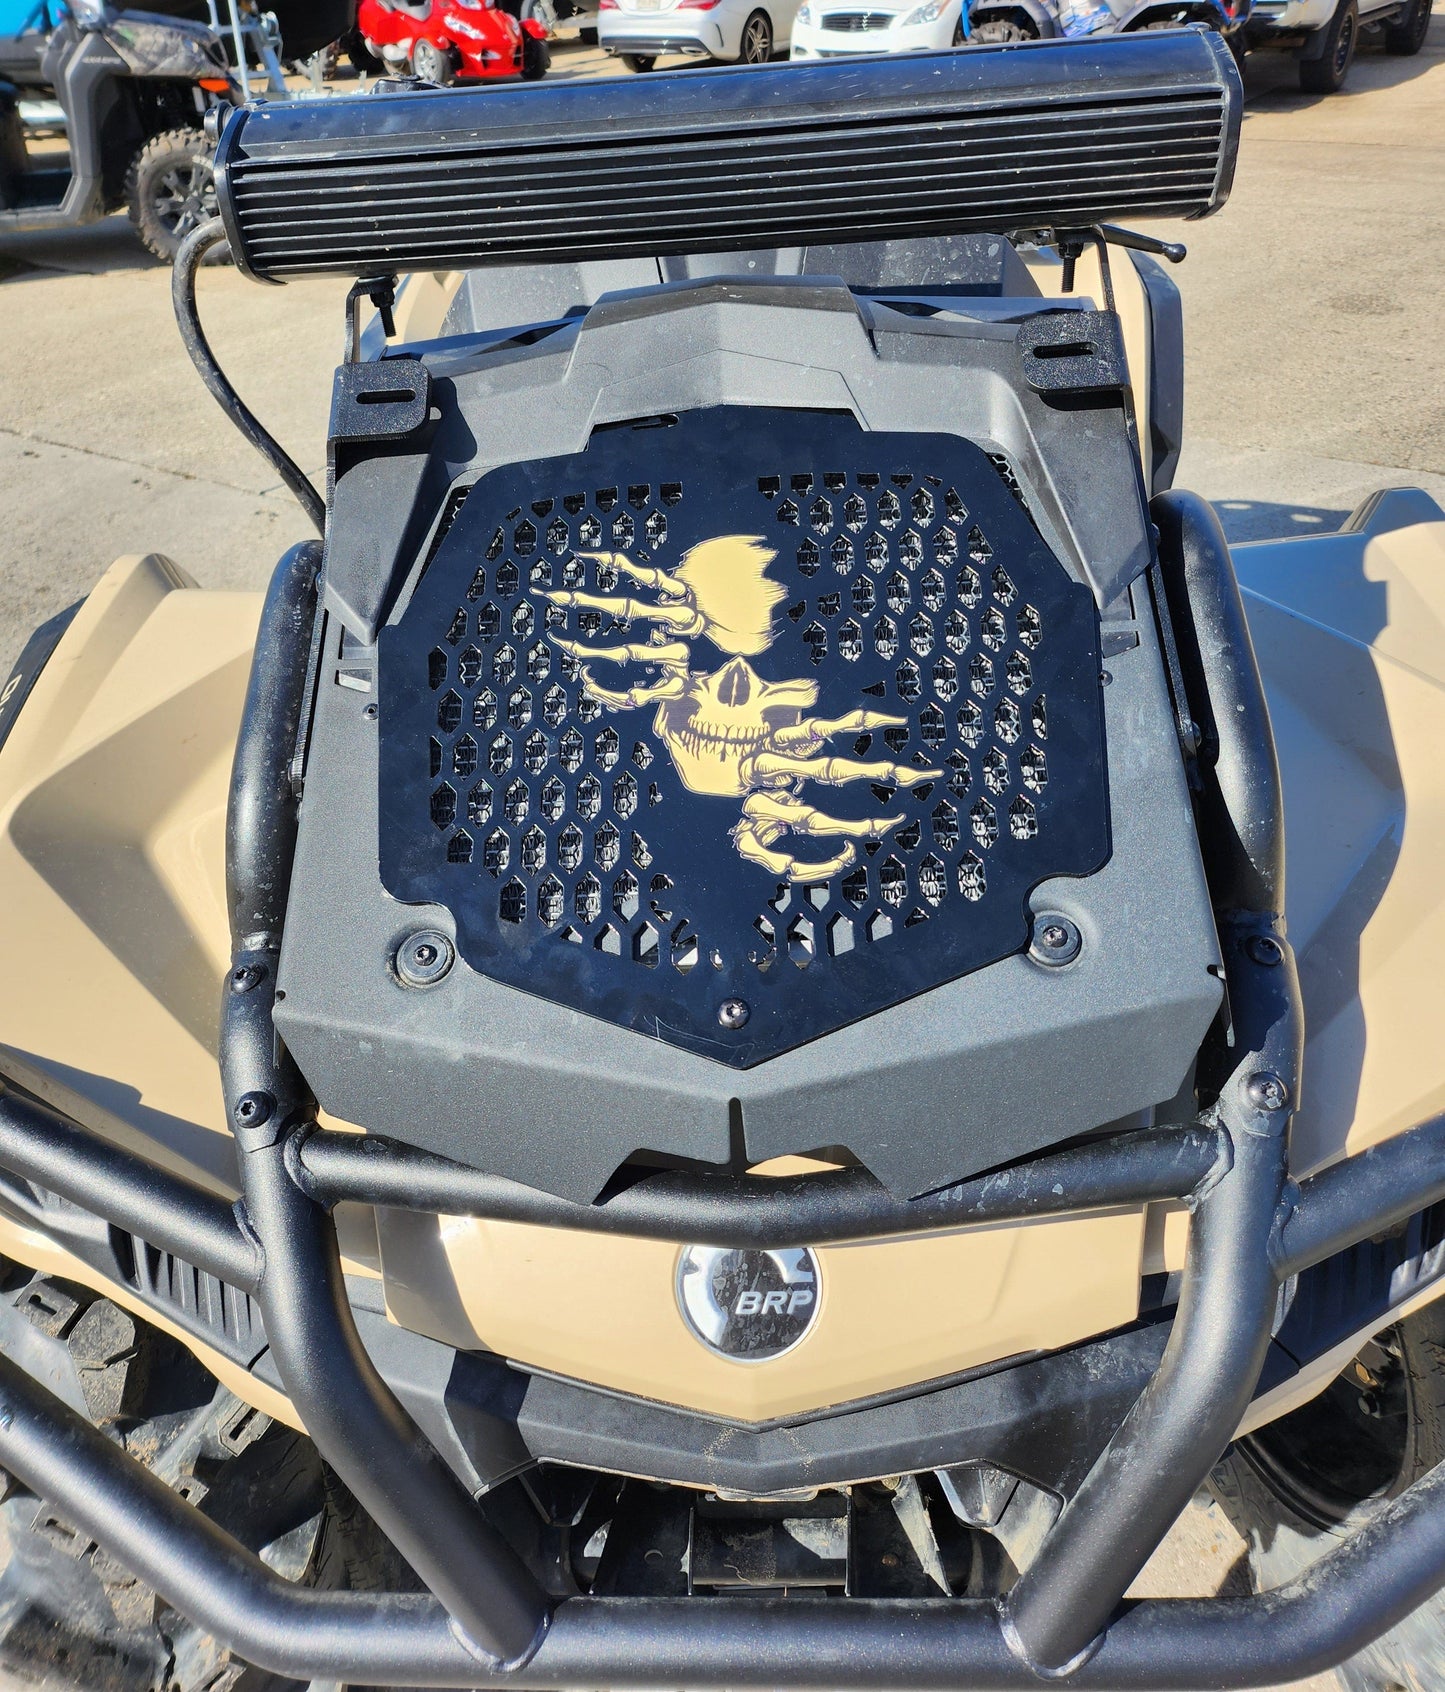 CREATE YOUR OWN CUSTOM- Cover for Radiator fits Can Am Outlander Max XMR 450 570 650 850 1000